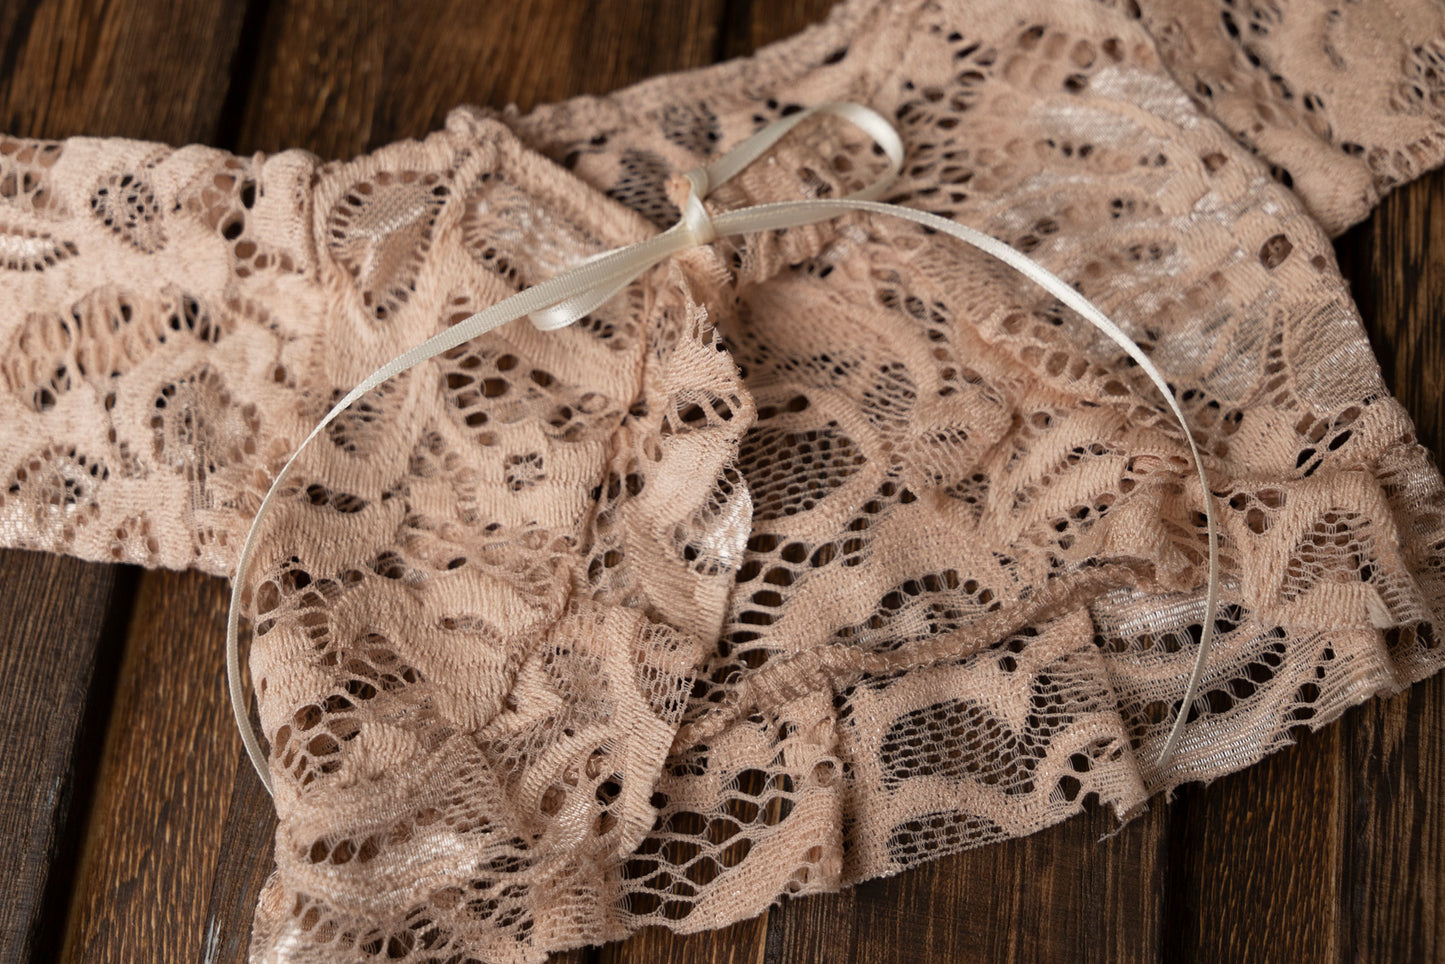 SET Leggings and Blouse - Nude Beige Lace